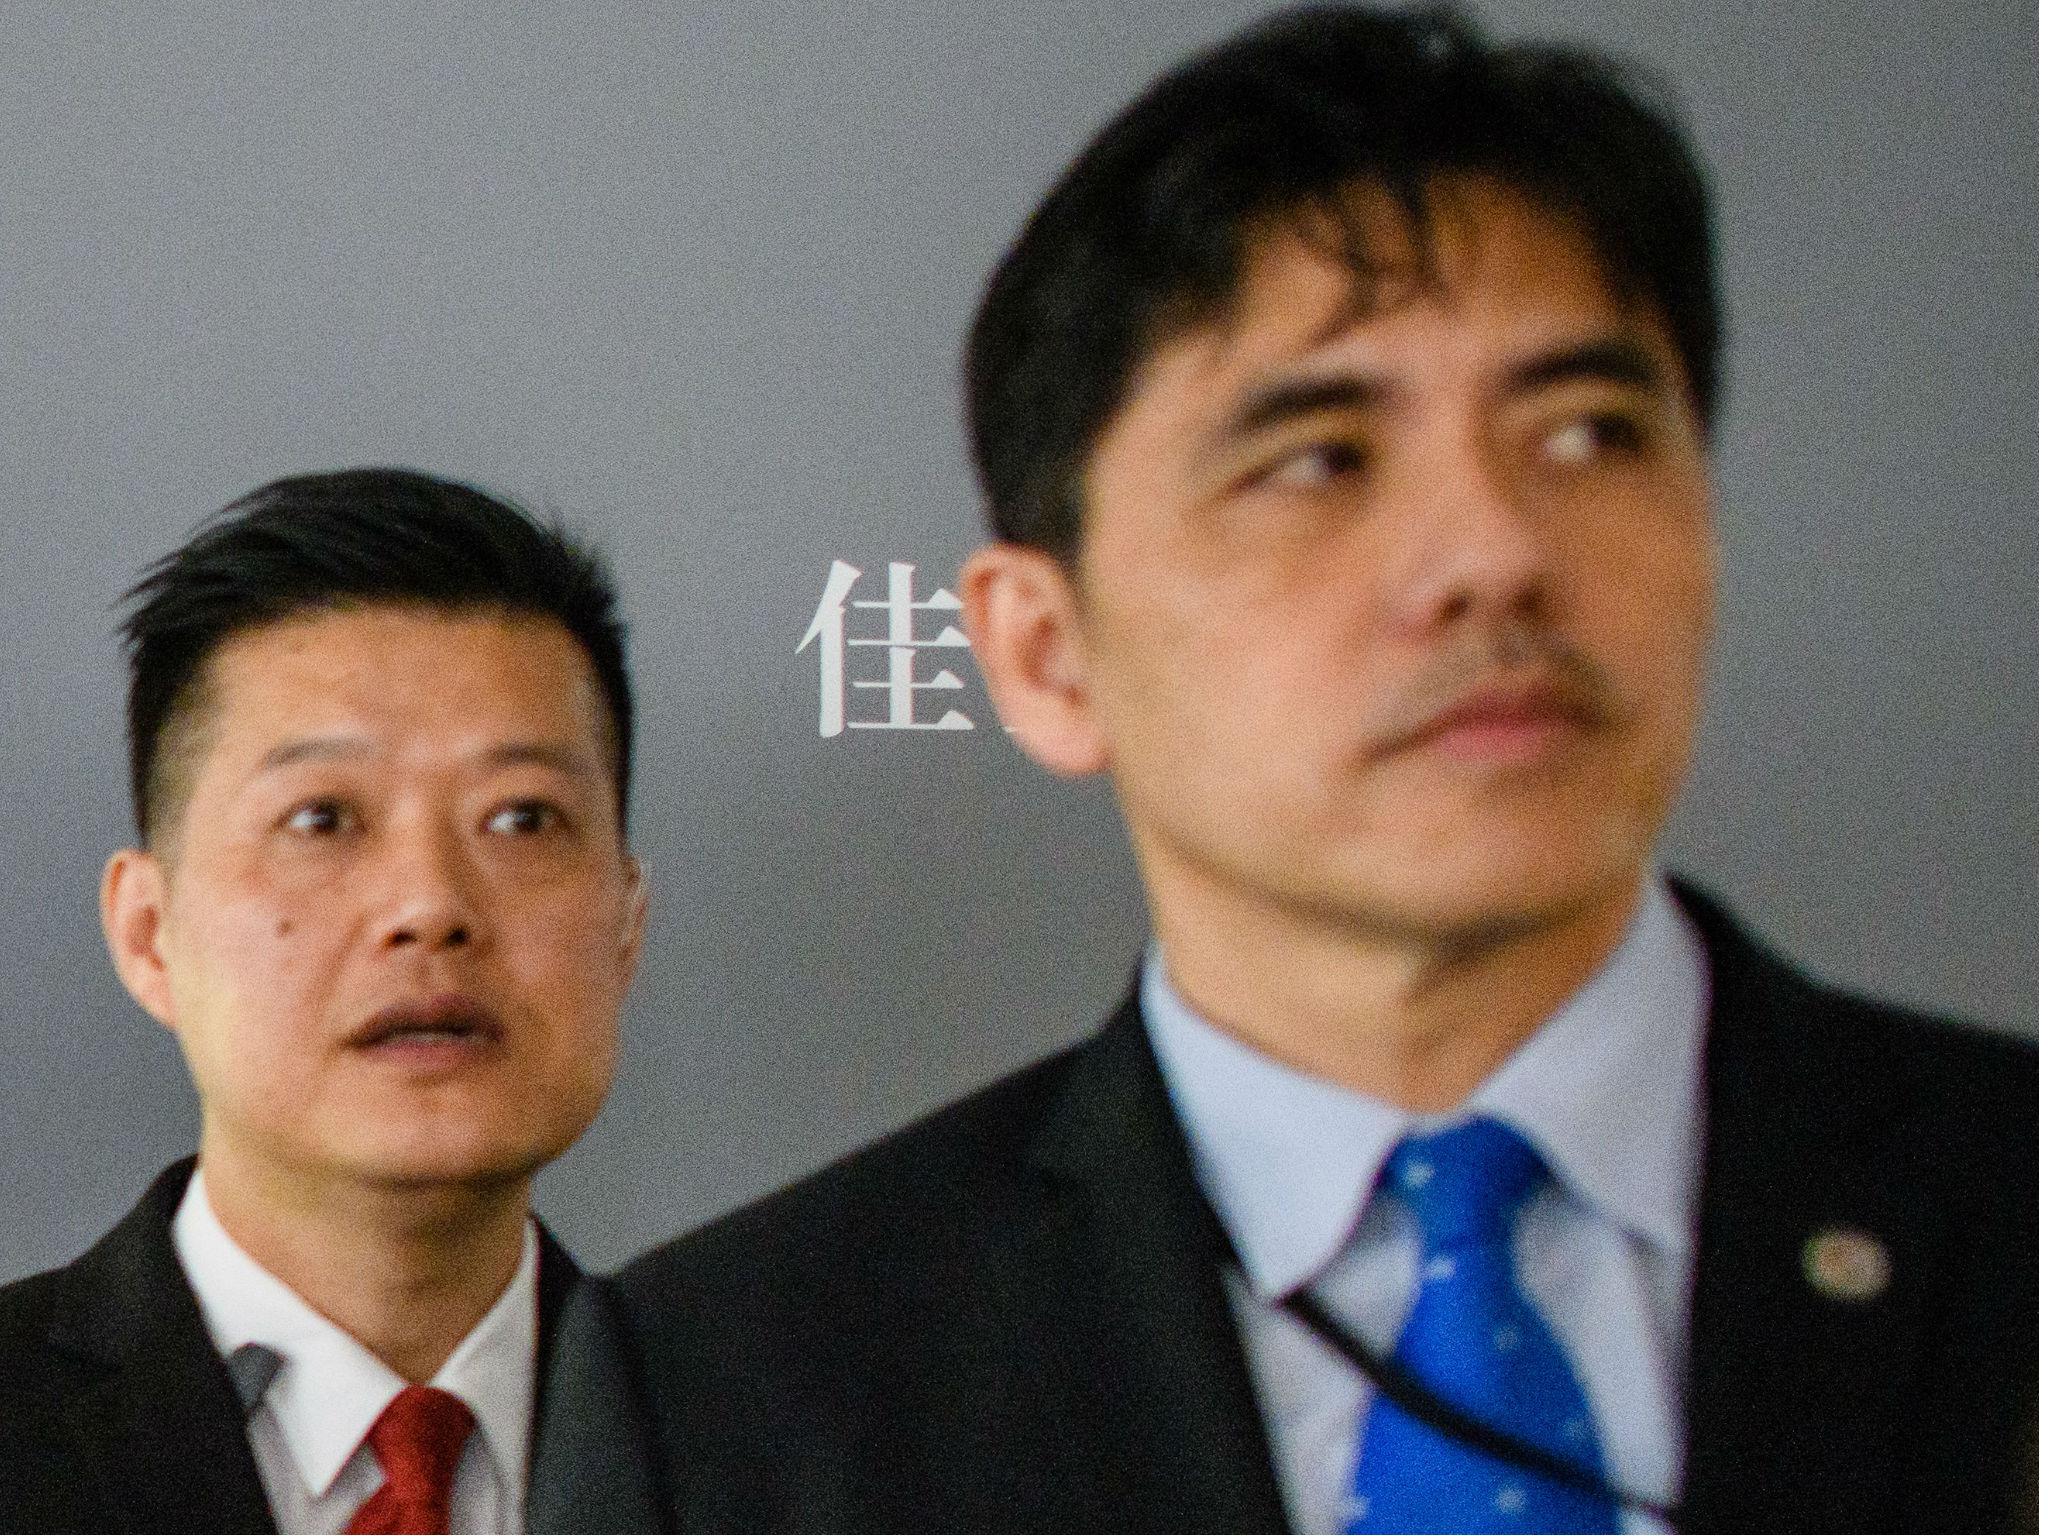 The man identified as former CIA agent Jerry Chun Shing Lee is pictured in 2017, at right